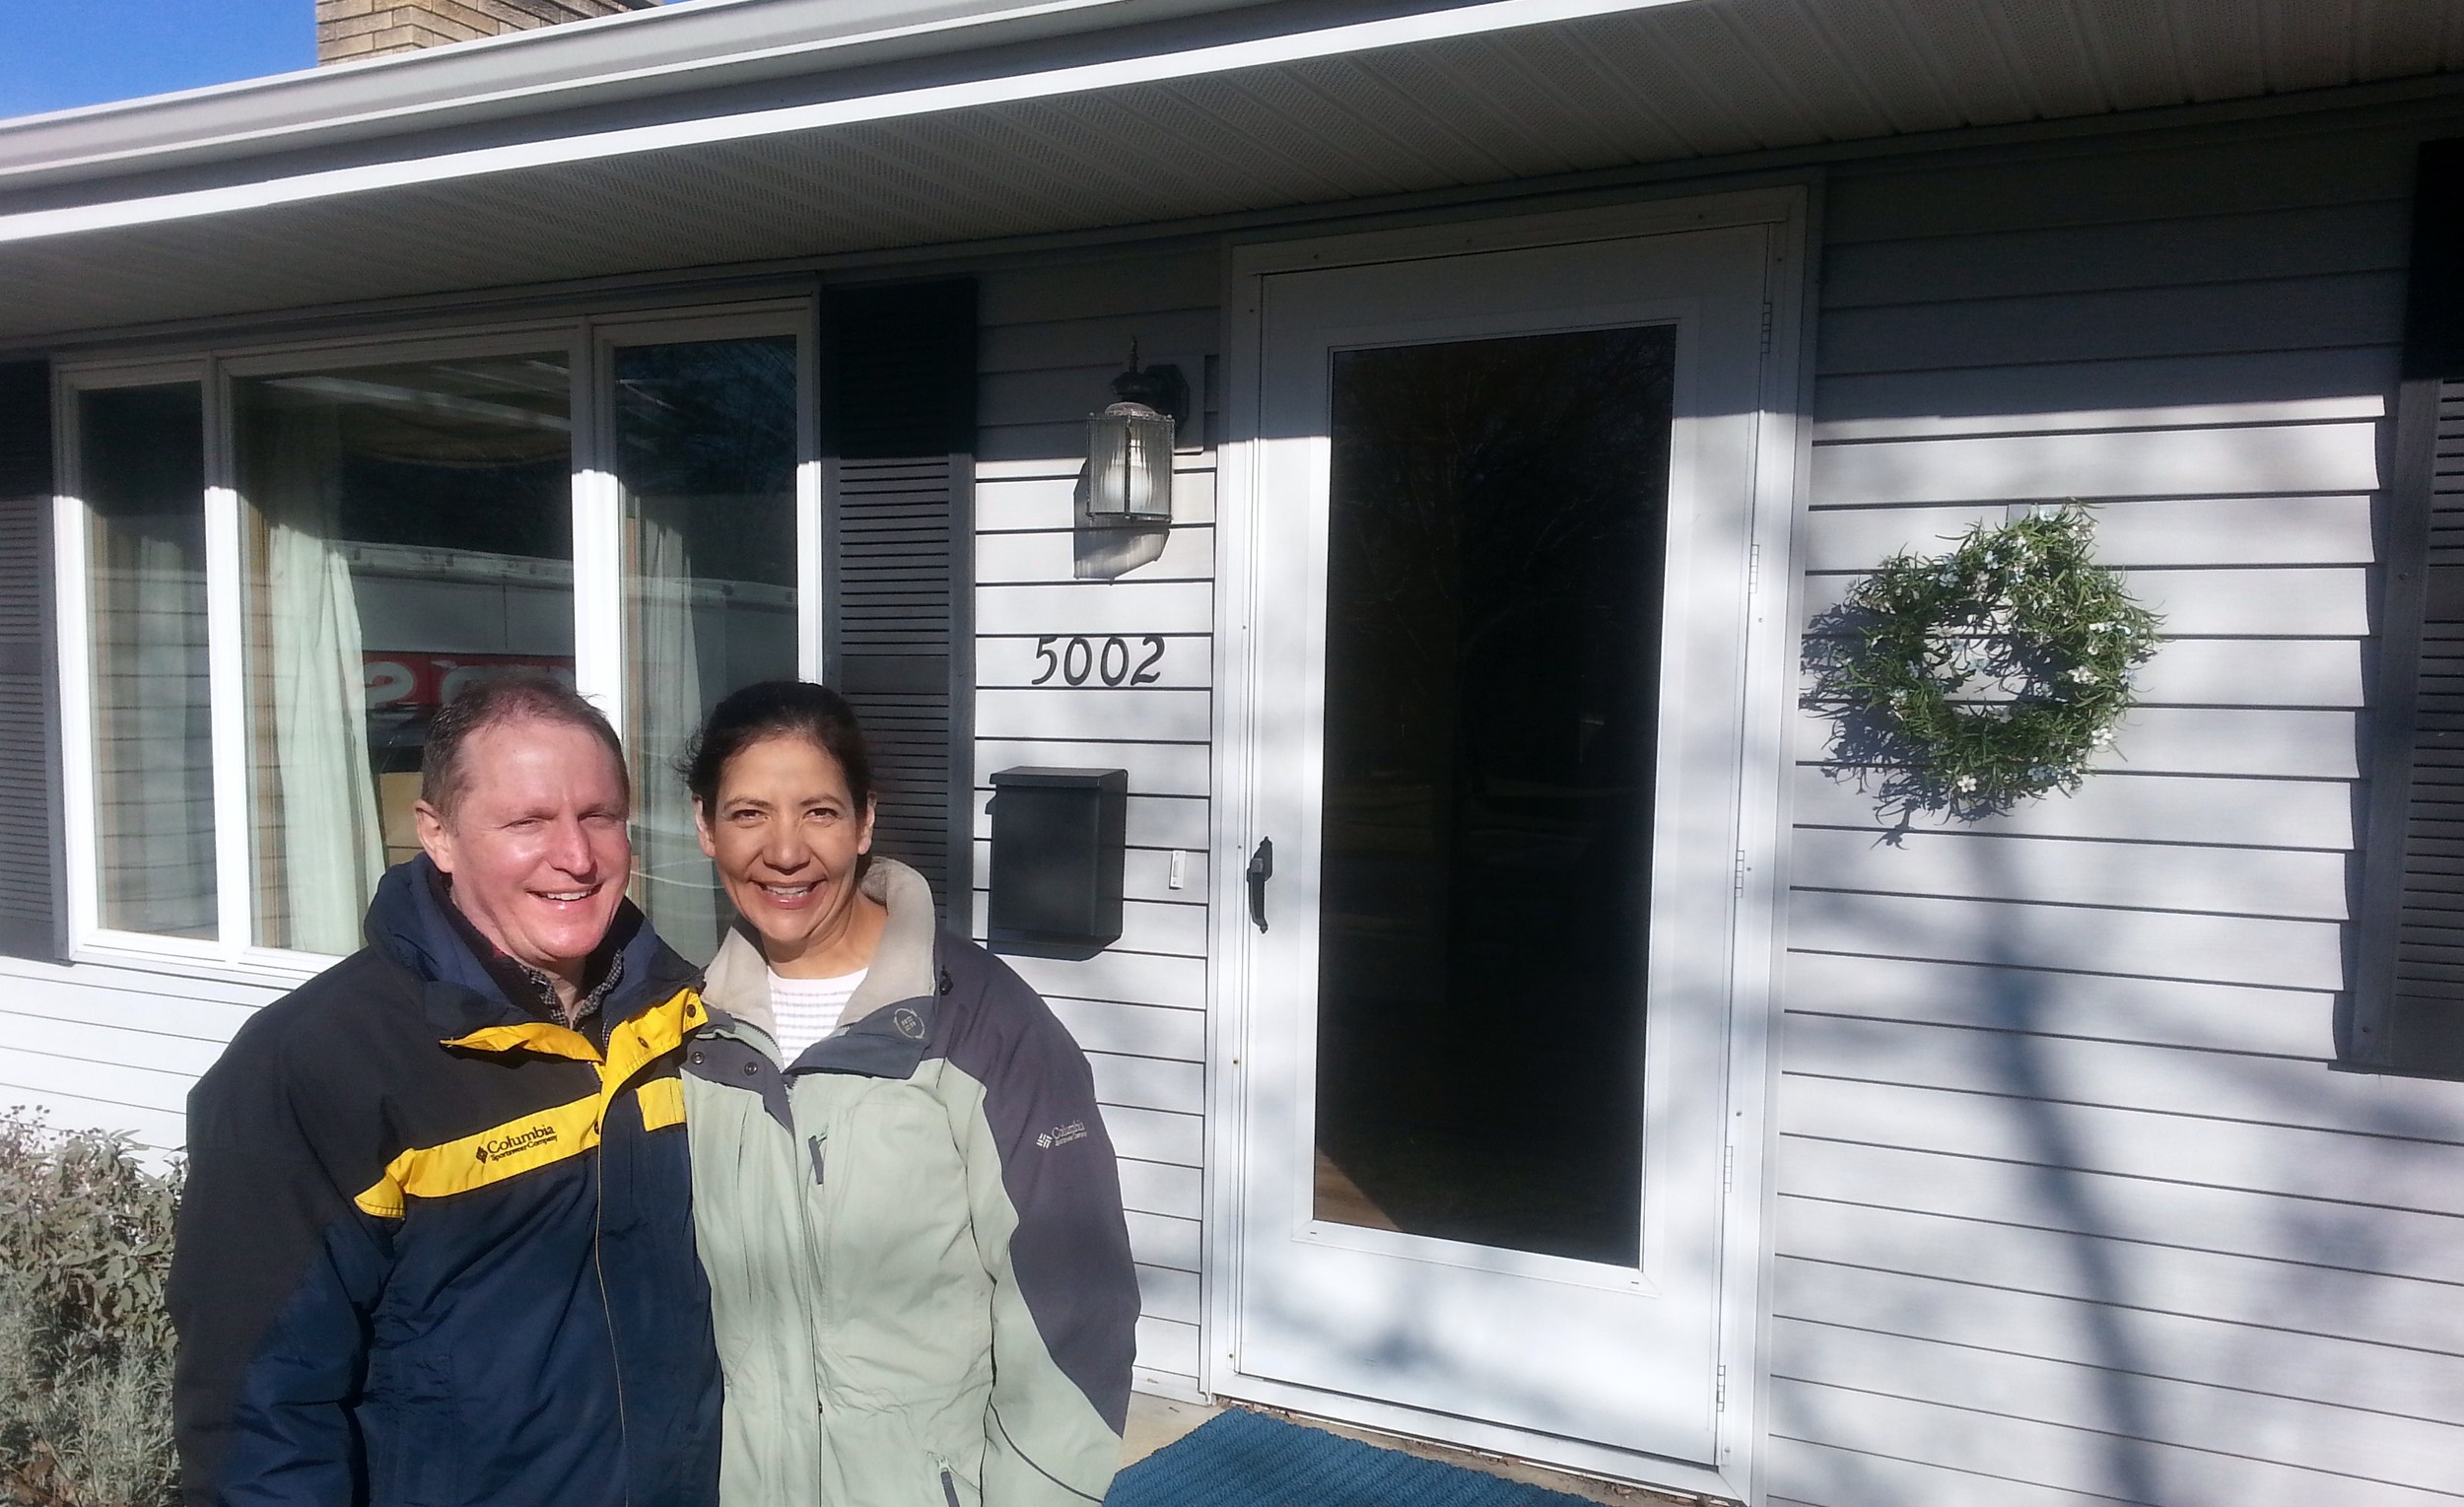 Bruce and Lisa Stein: happy homeowners, thanks to ROOST!